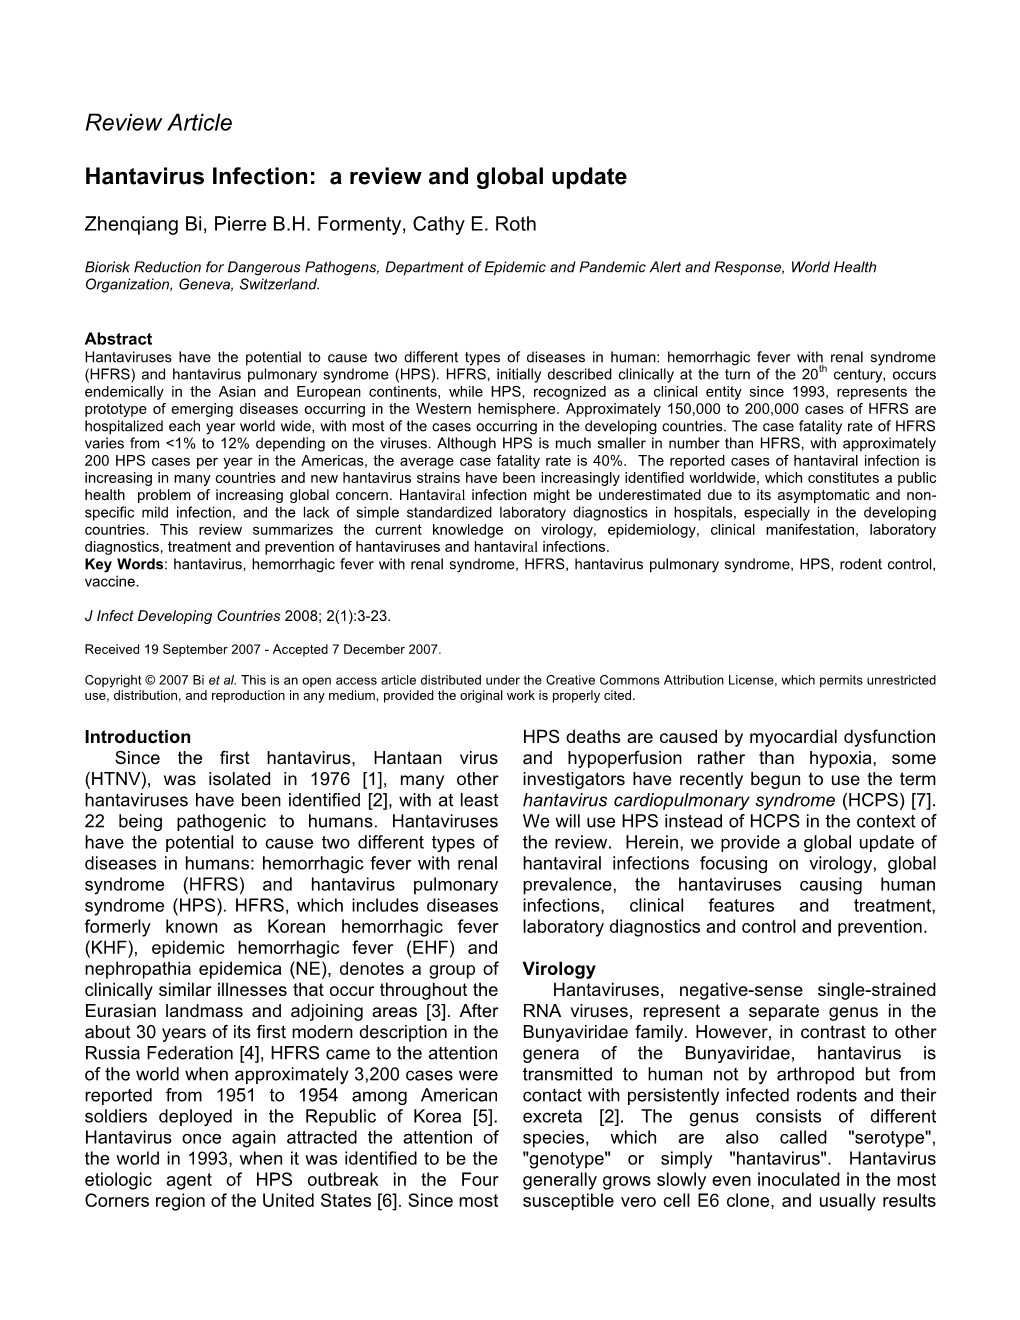 Hantavirus Infection: a Review and Global Update